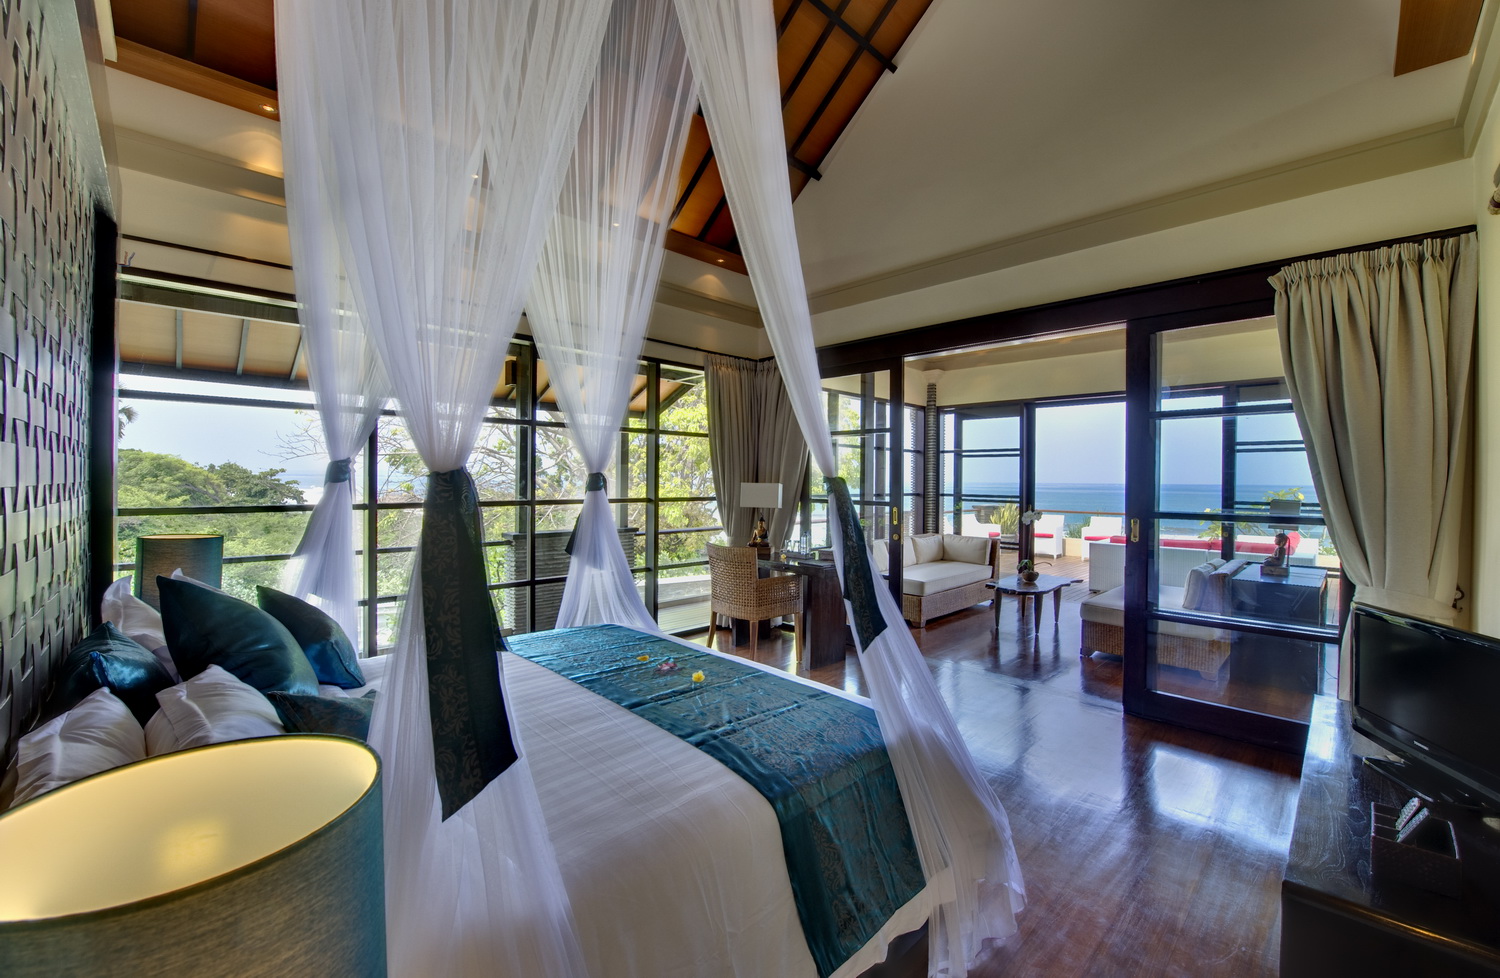 Master Bedroom design with a beautiful view